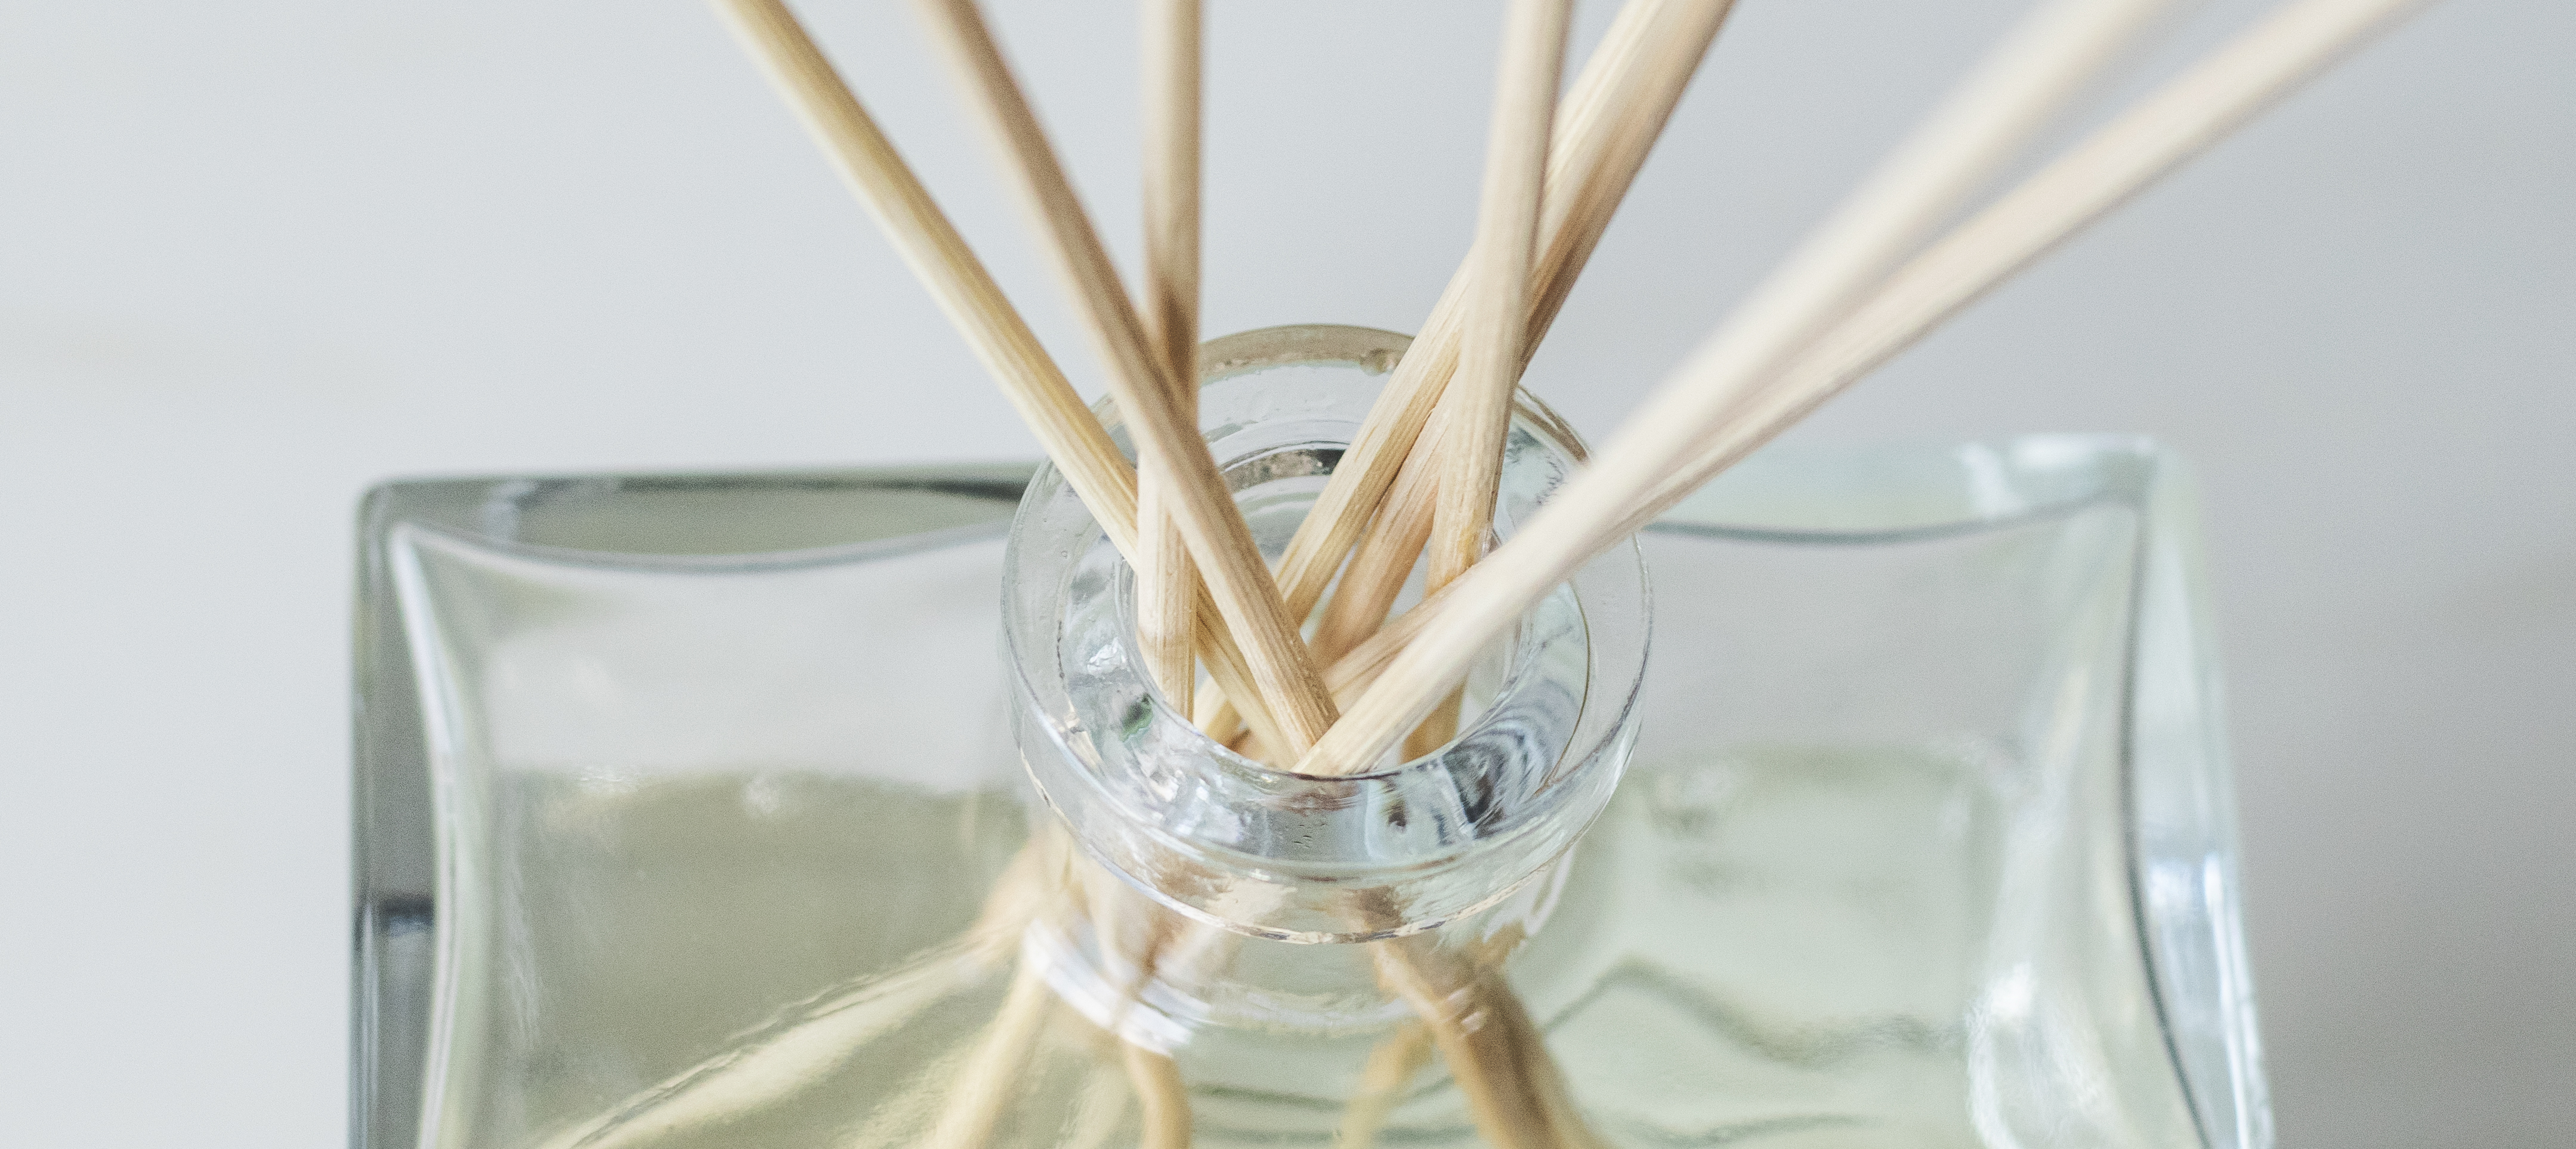 Closeup of a reed diffuser in a glass container.